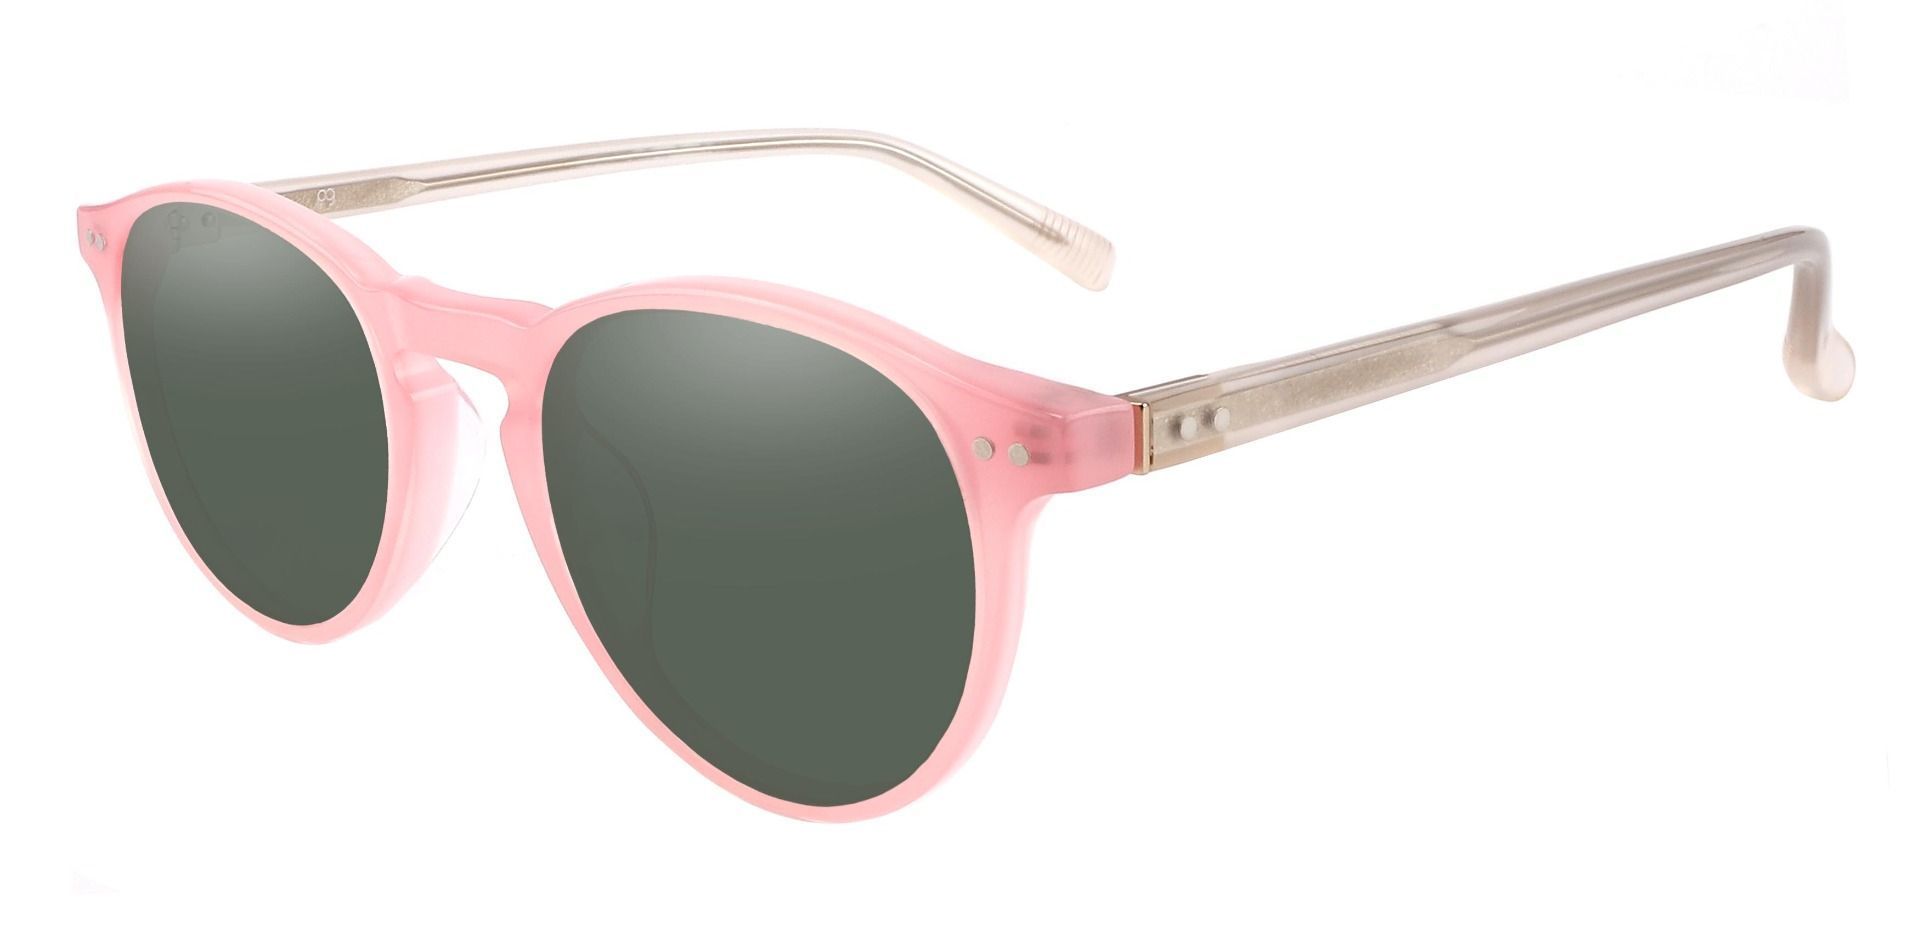 Monarch Oval Reading Sunglasses - Pink Frame With Green Lenses